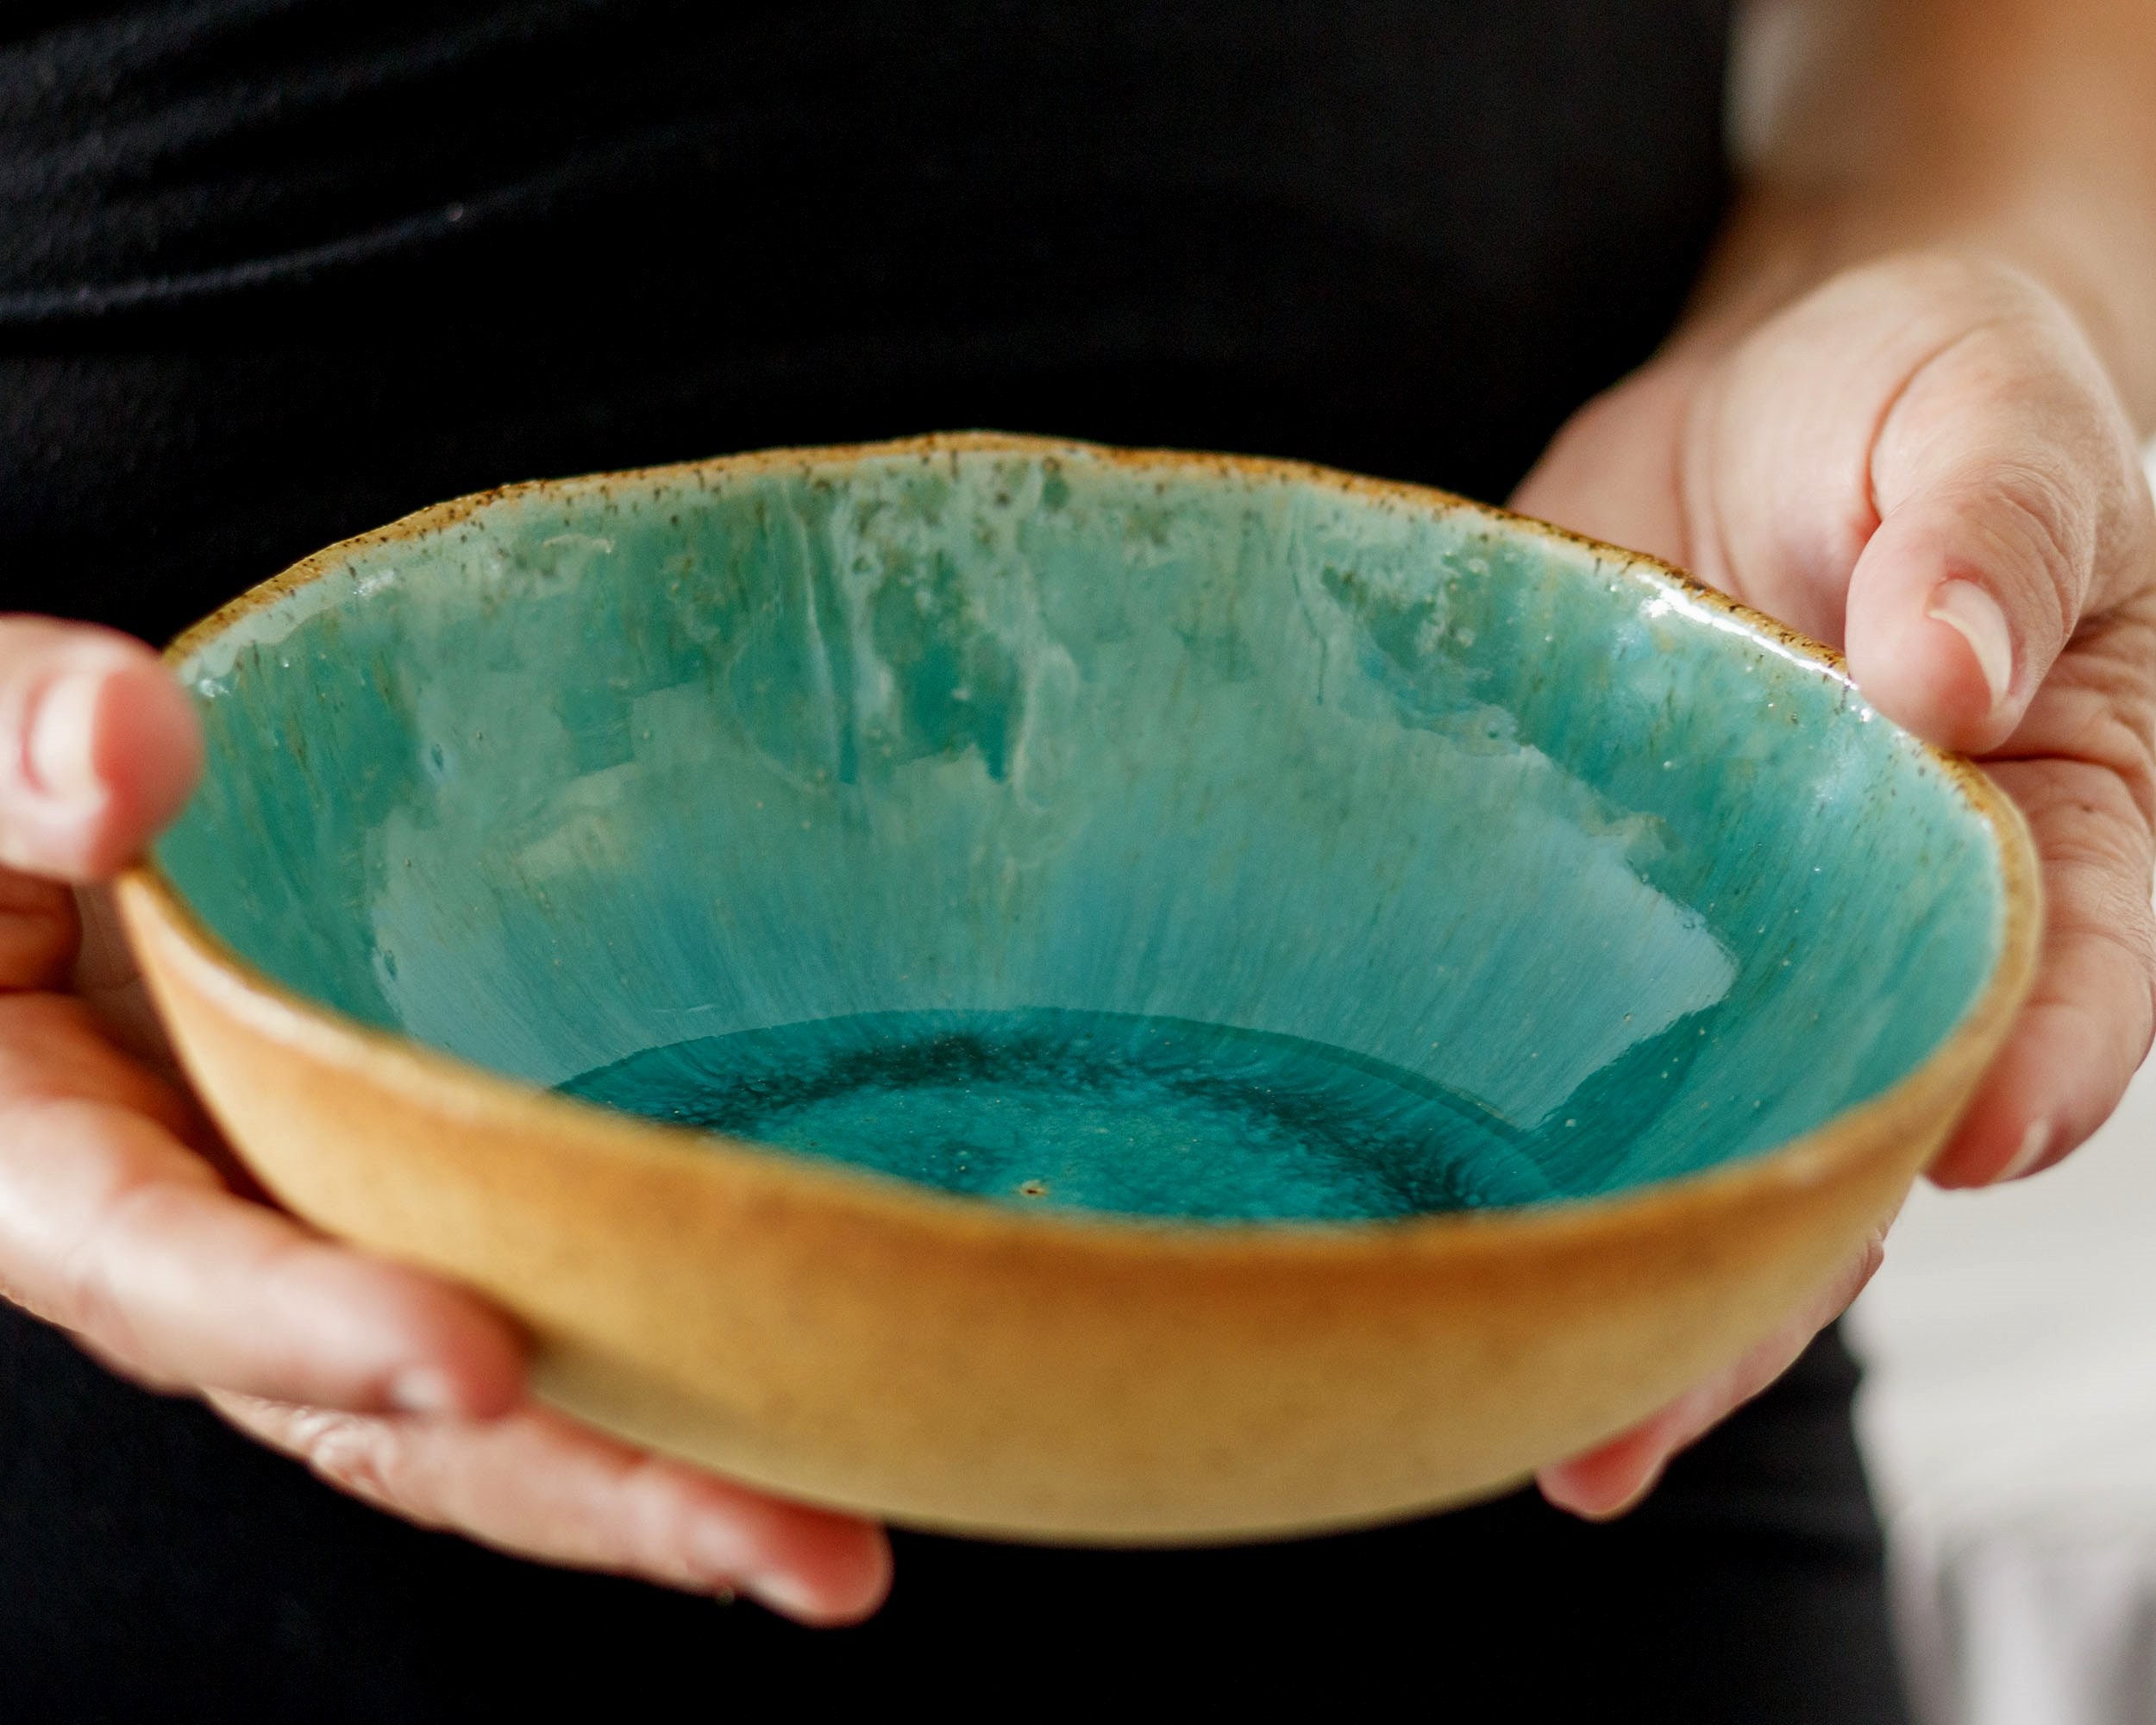 Ceramic Bowl For Pasta, Ramen, Salad, Soup, Cereal Or Breakfast, Handmade Pottery Large Bowls in Blue & Green